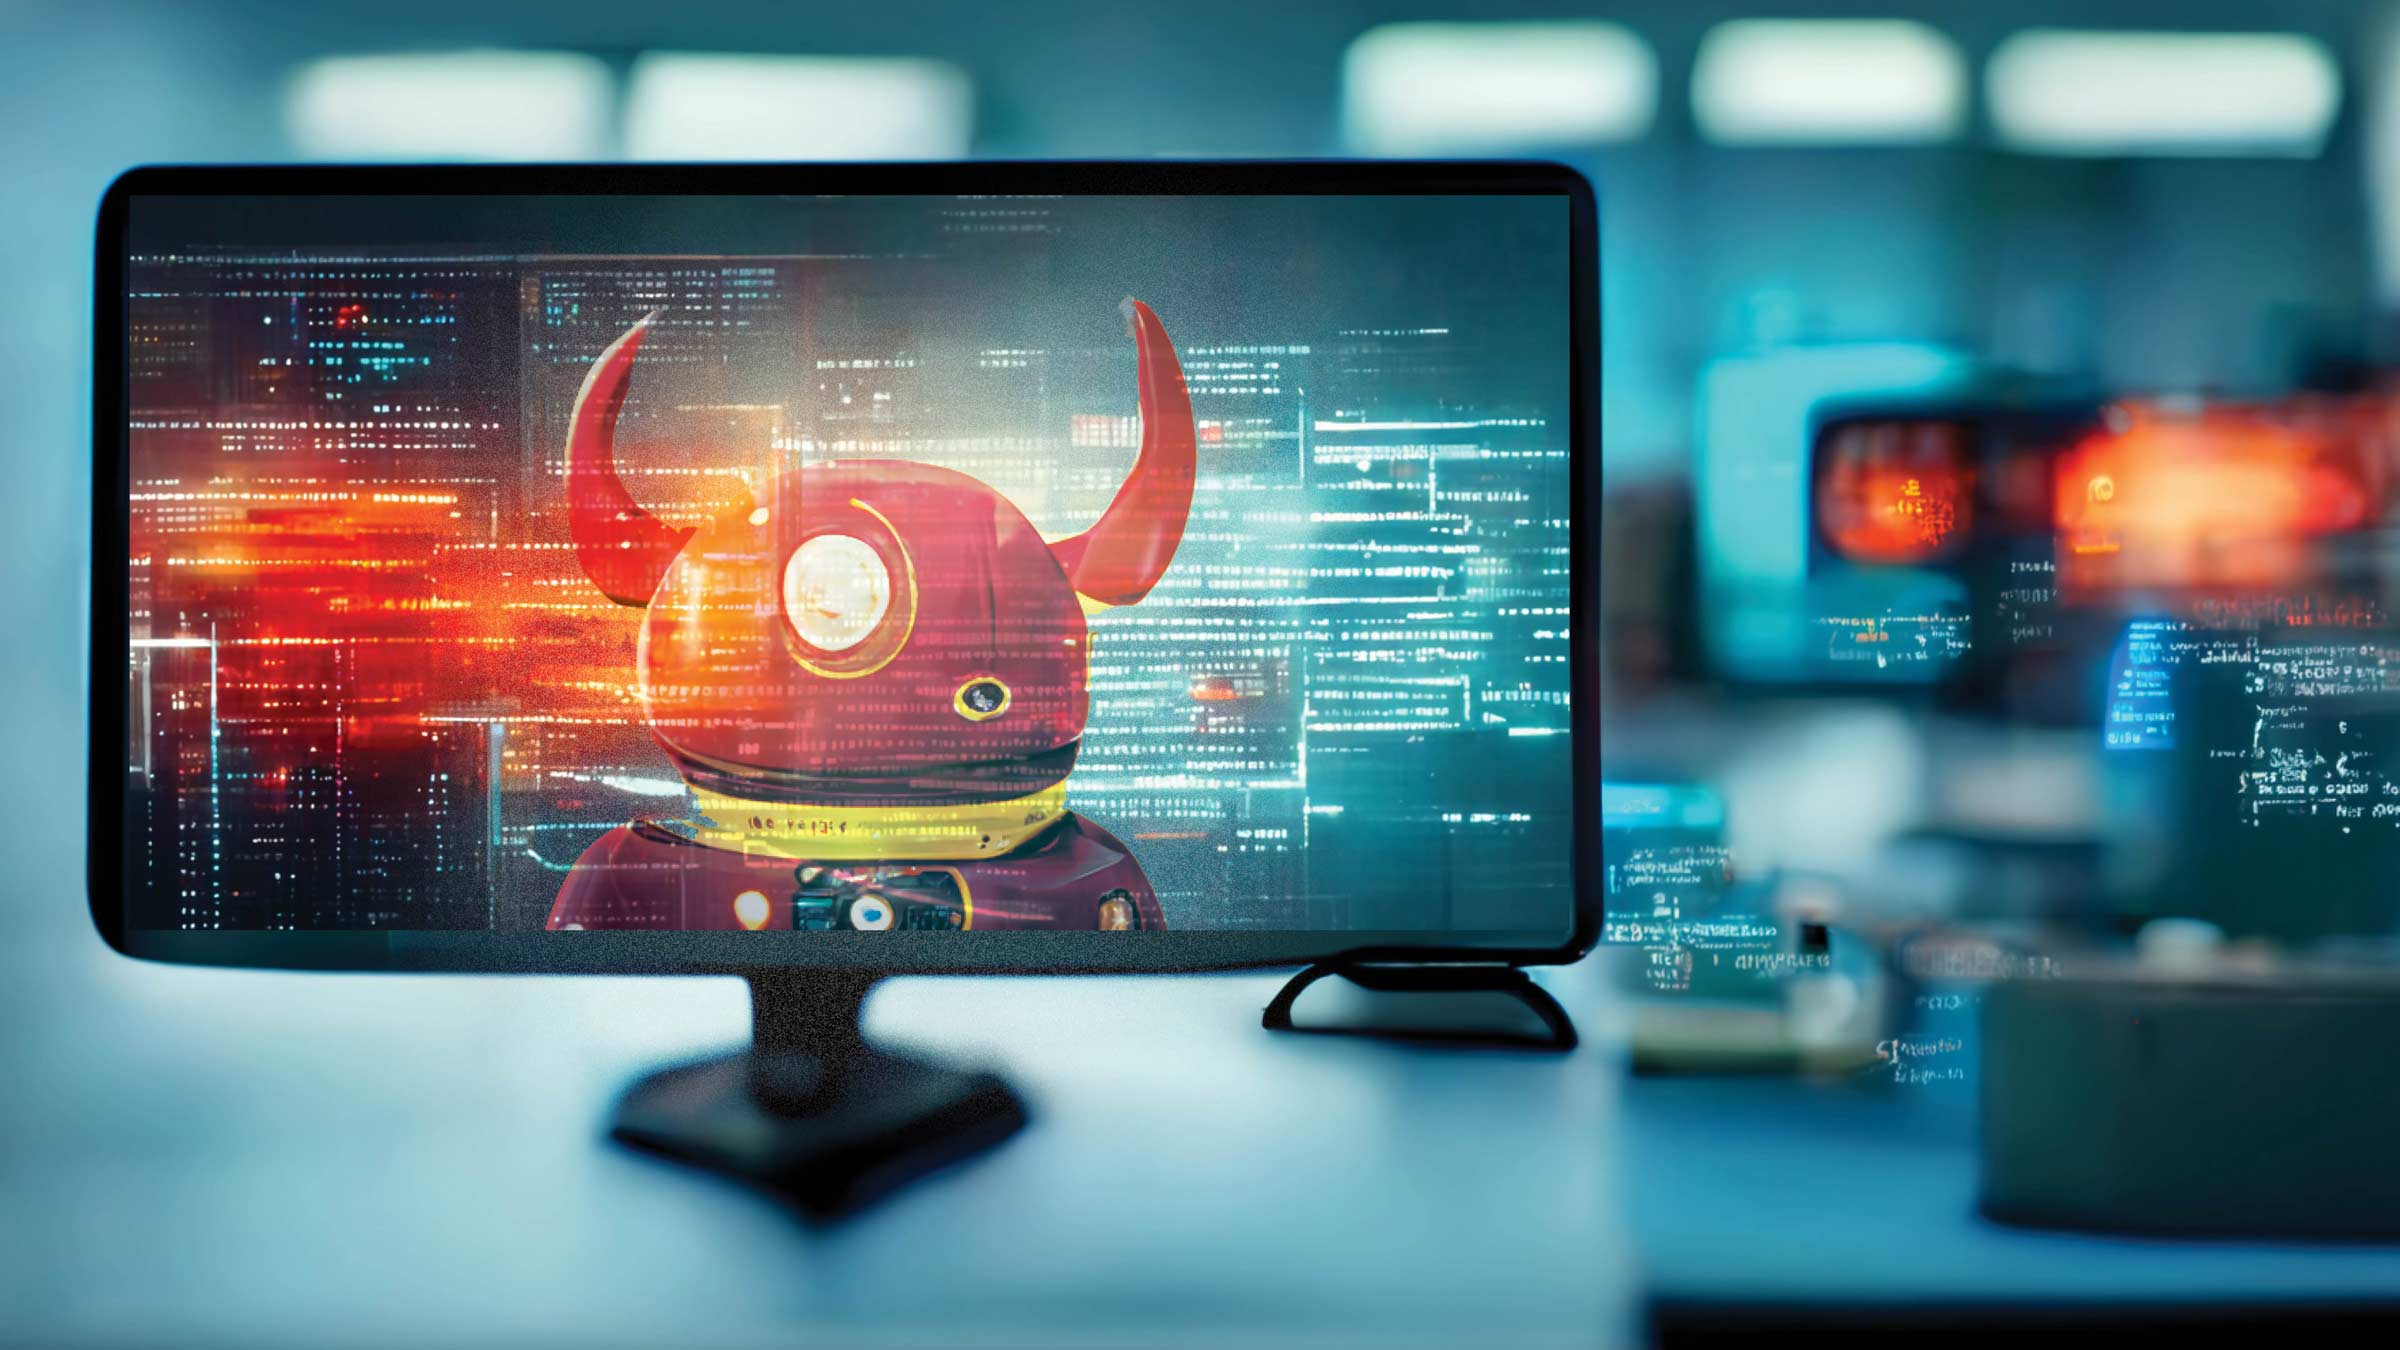 a computer monitor with image of code and a Devil-like figure